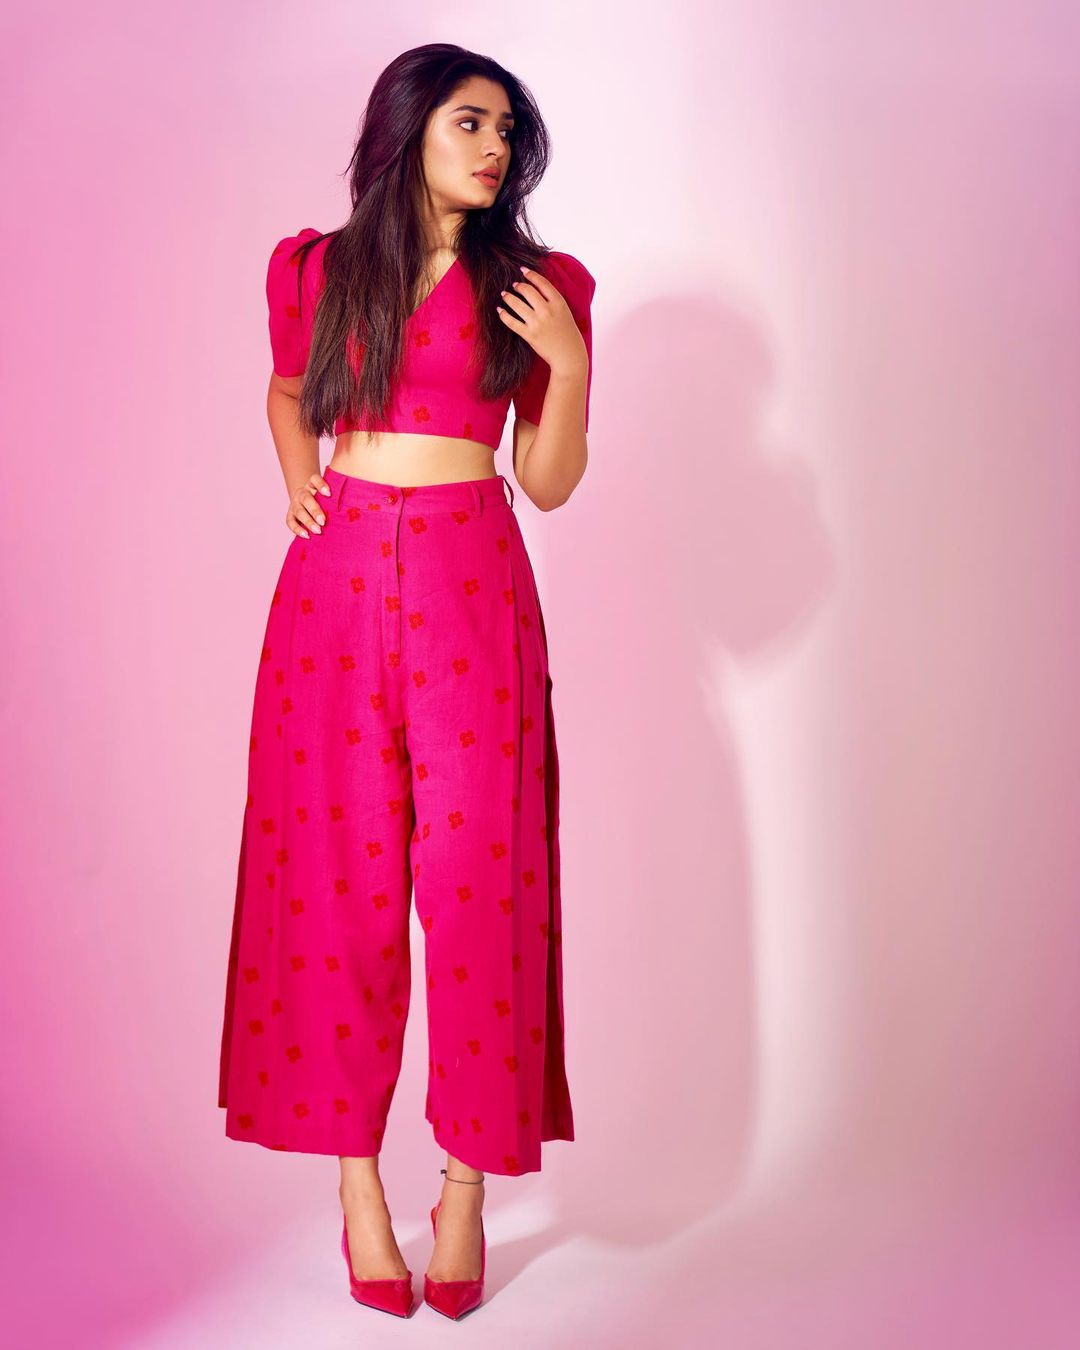 Krithi Shetty Pretty Look In Hot Pink Co-Ord Set